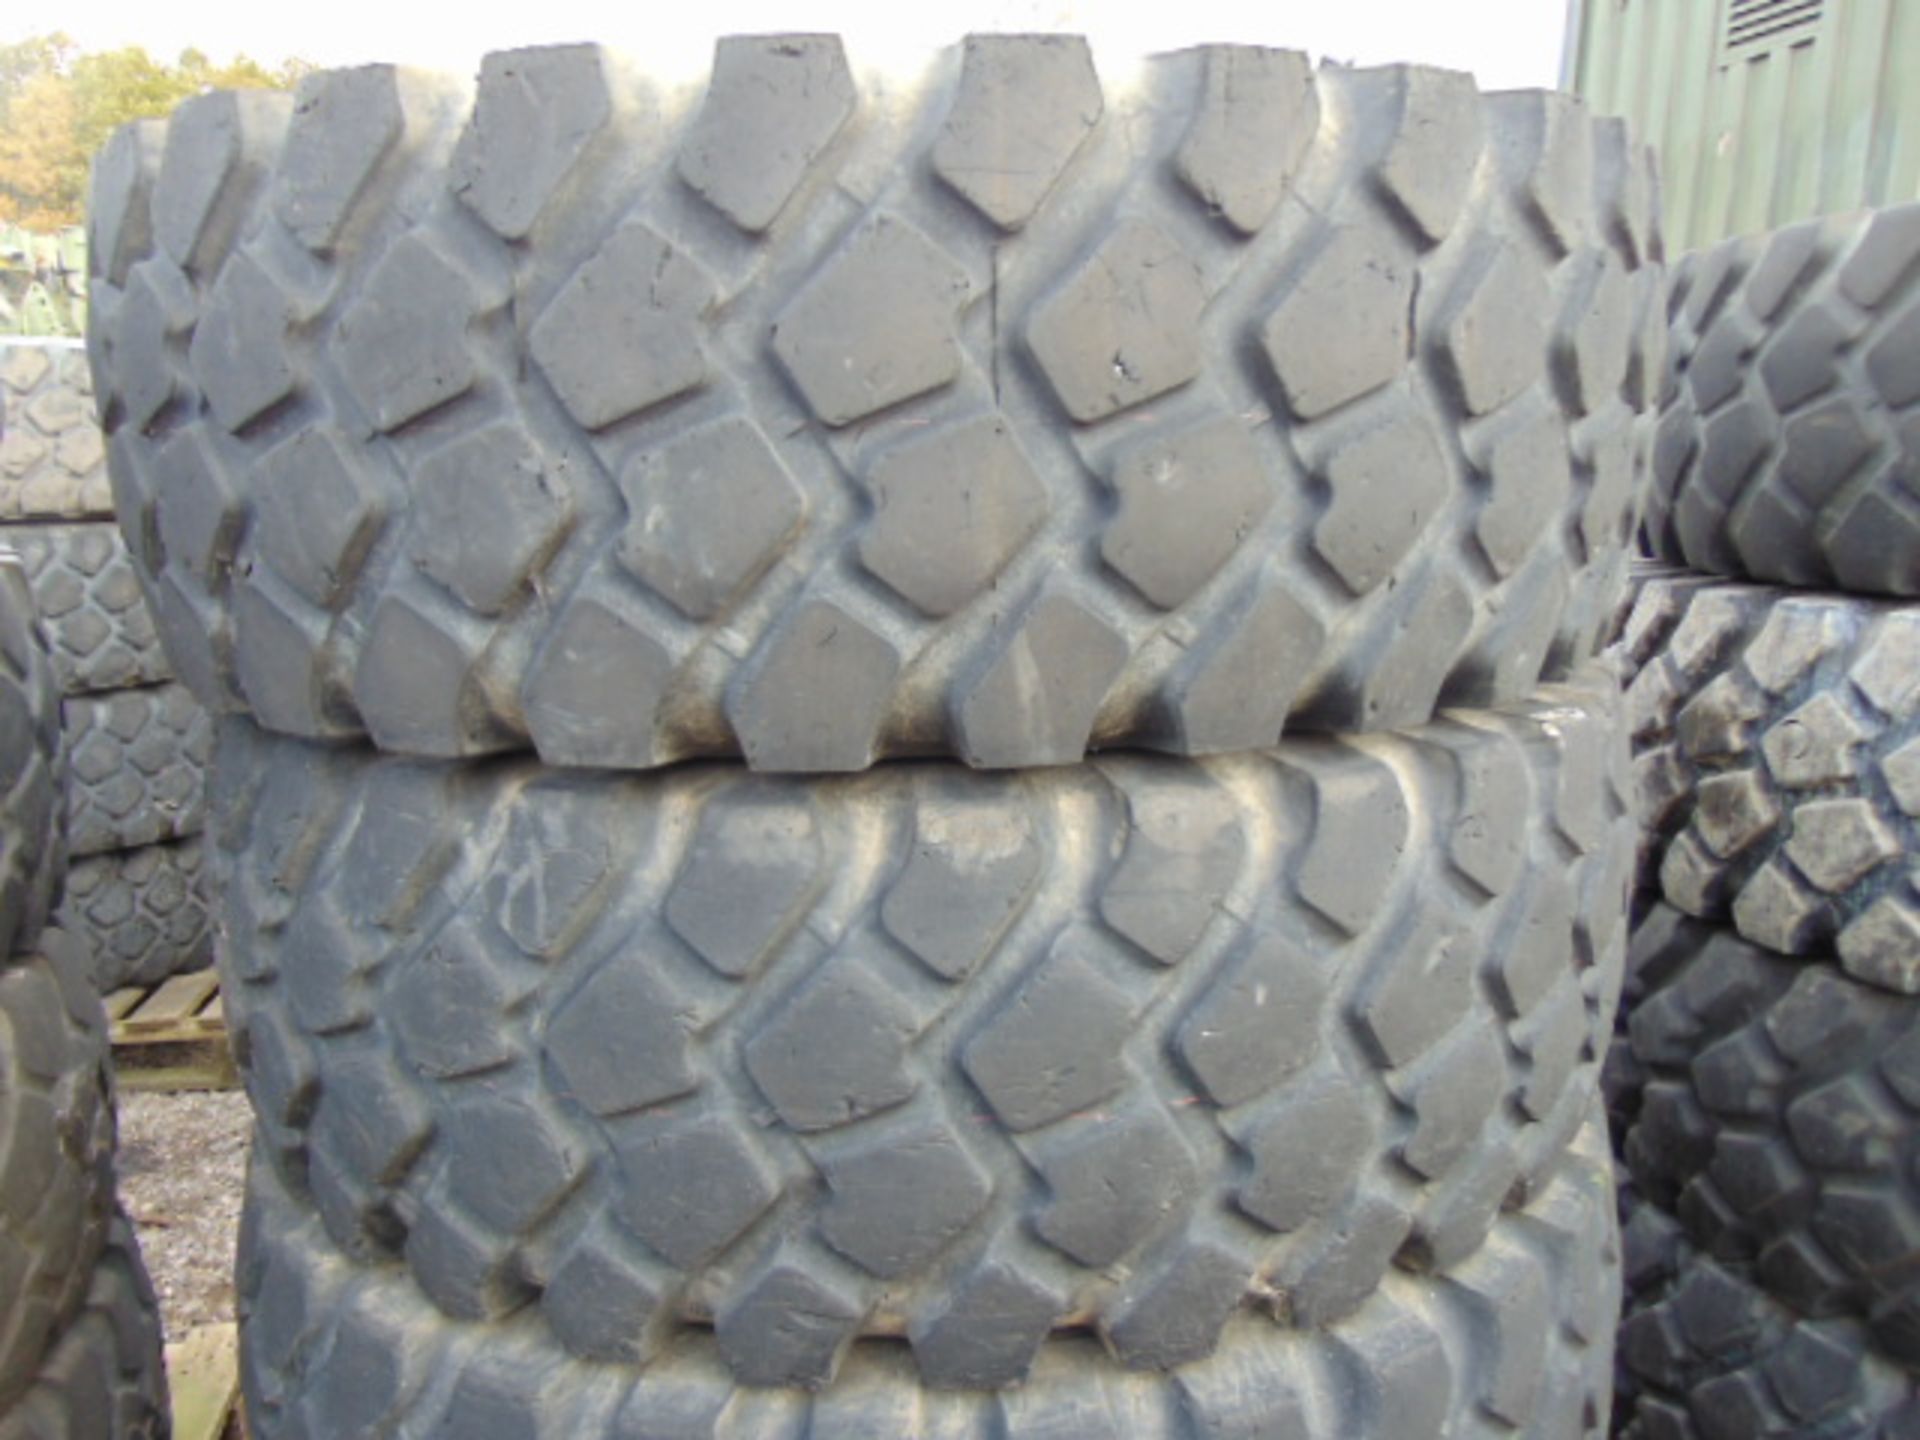 4 x Michelin 16.00 R20 XZL Tyres - Image 2 of 6